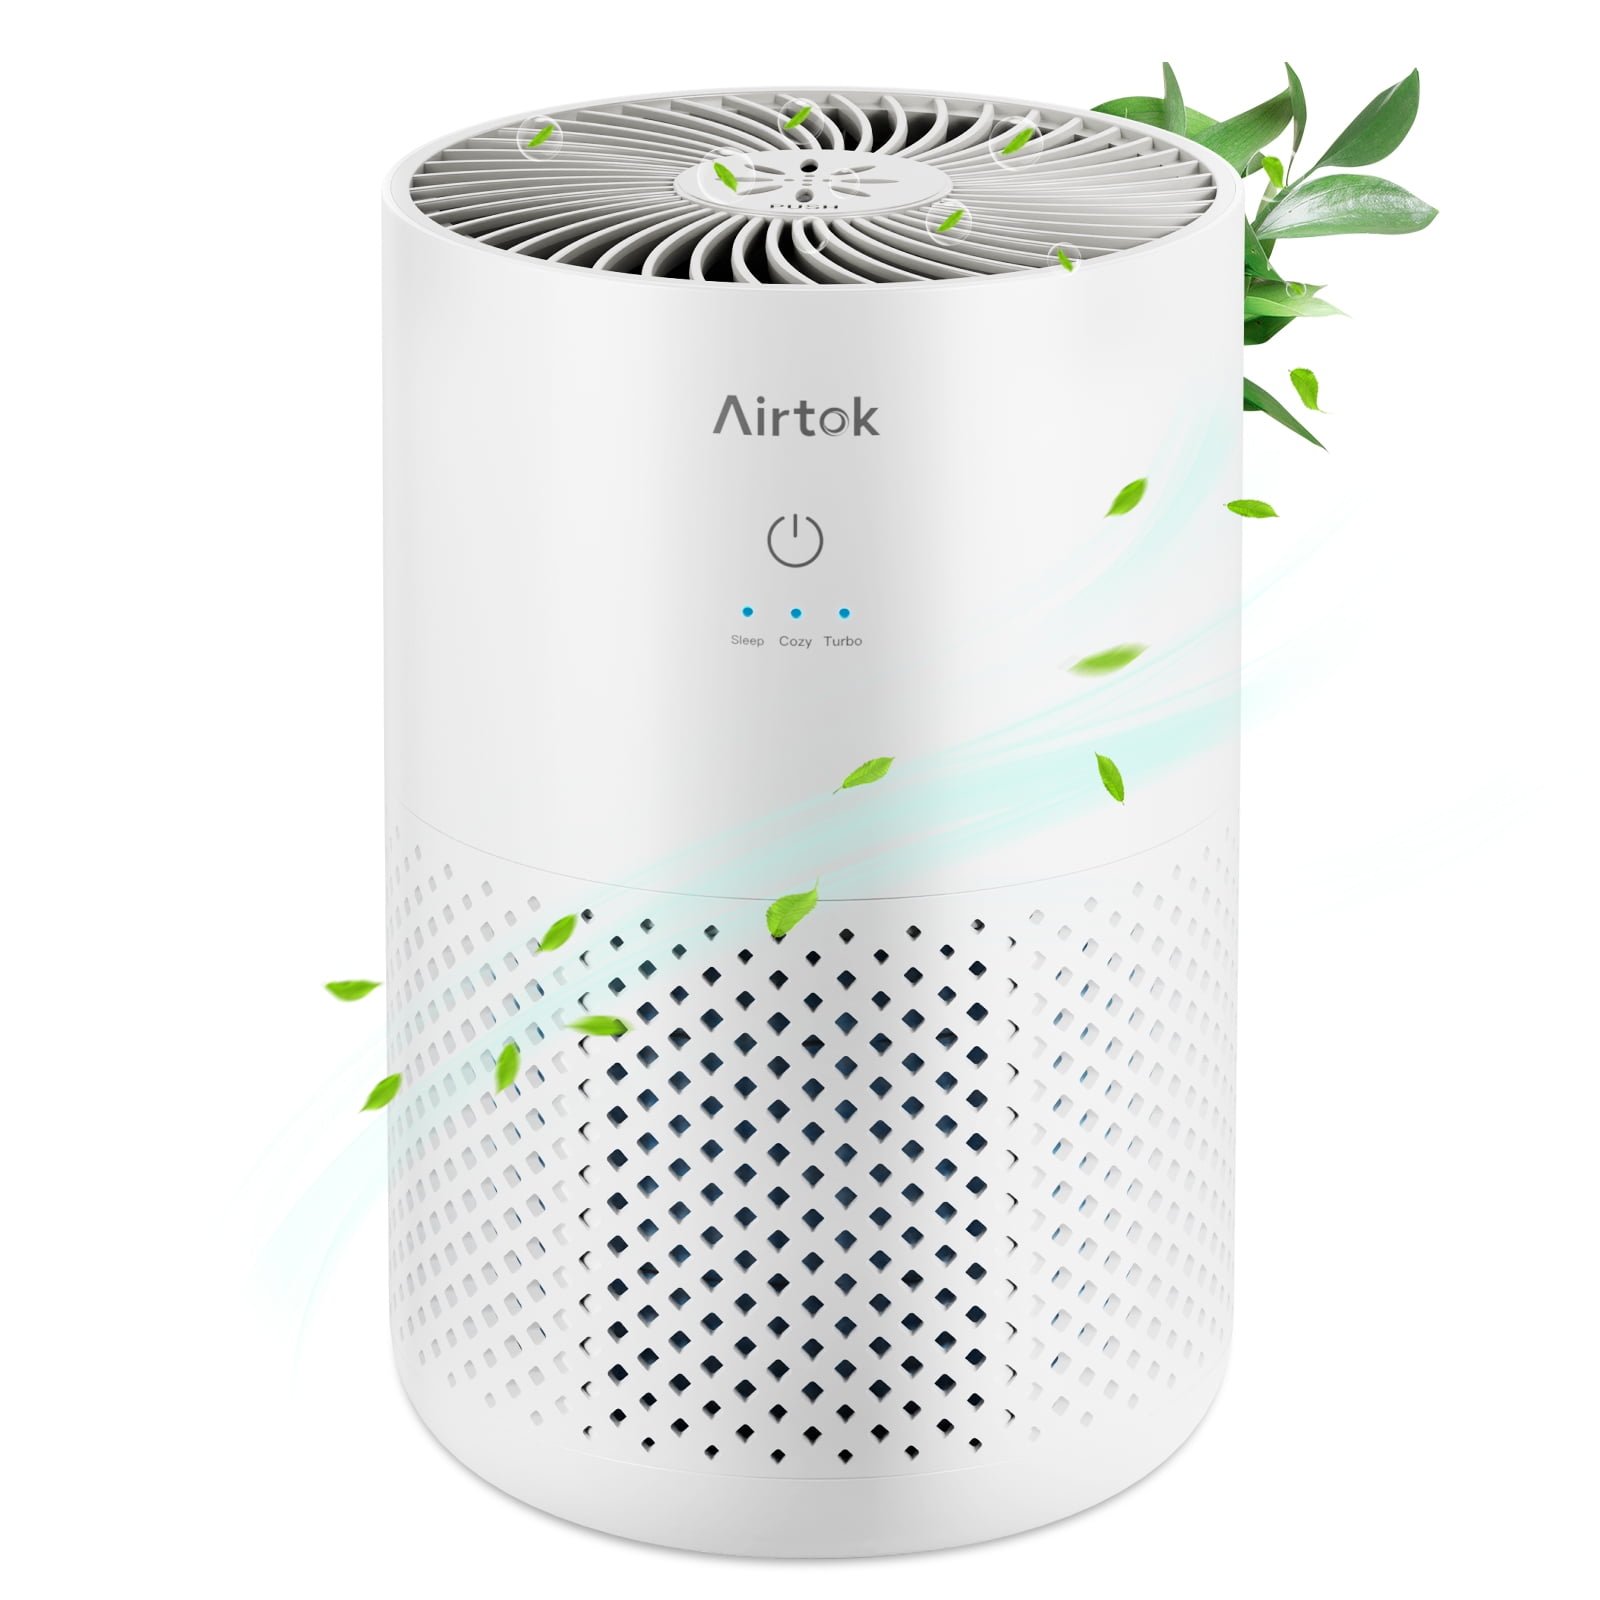 AIRTOK HEPA Air Purifier for Home, Bedroom, Office (355 Sq.ft), Air Cleaner for Allergies, Asthma, Pet Dander, Mold, Smoke, and Odor with Fragrance Sponge, KQ-31, White